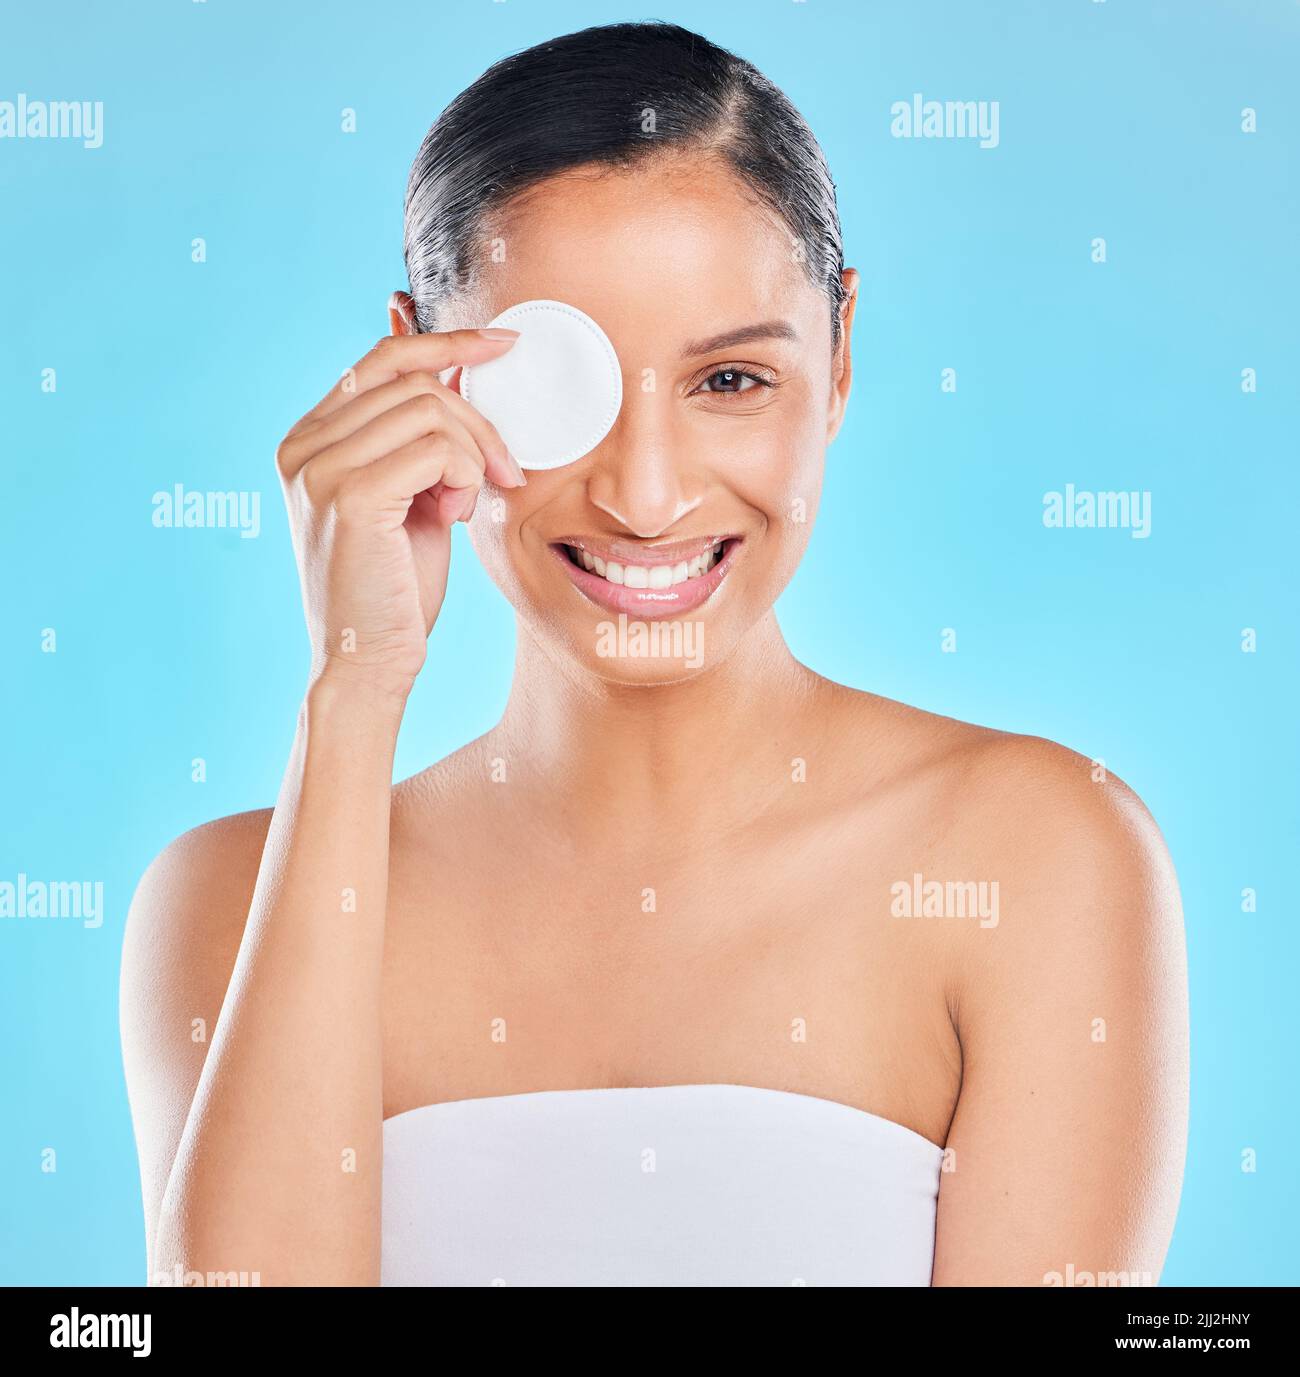 . Studio portrait of an attractive young woman exfoliating her face against a blue background. Stock Photo